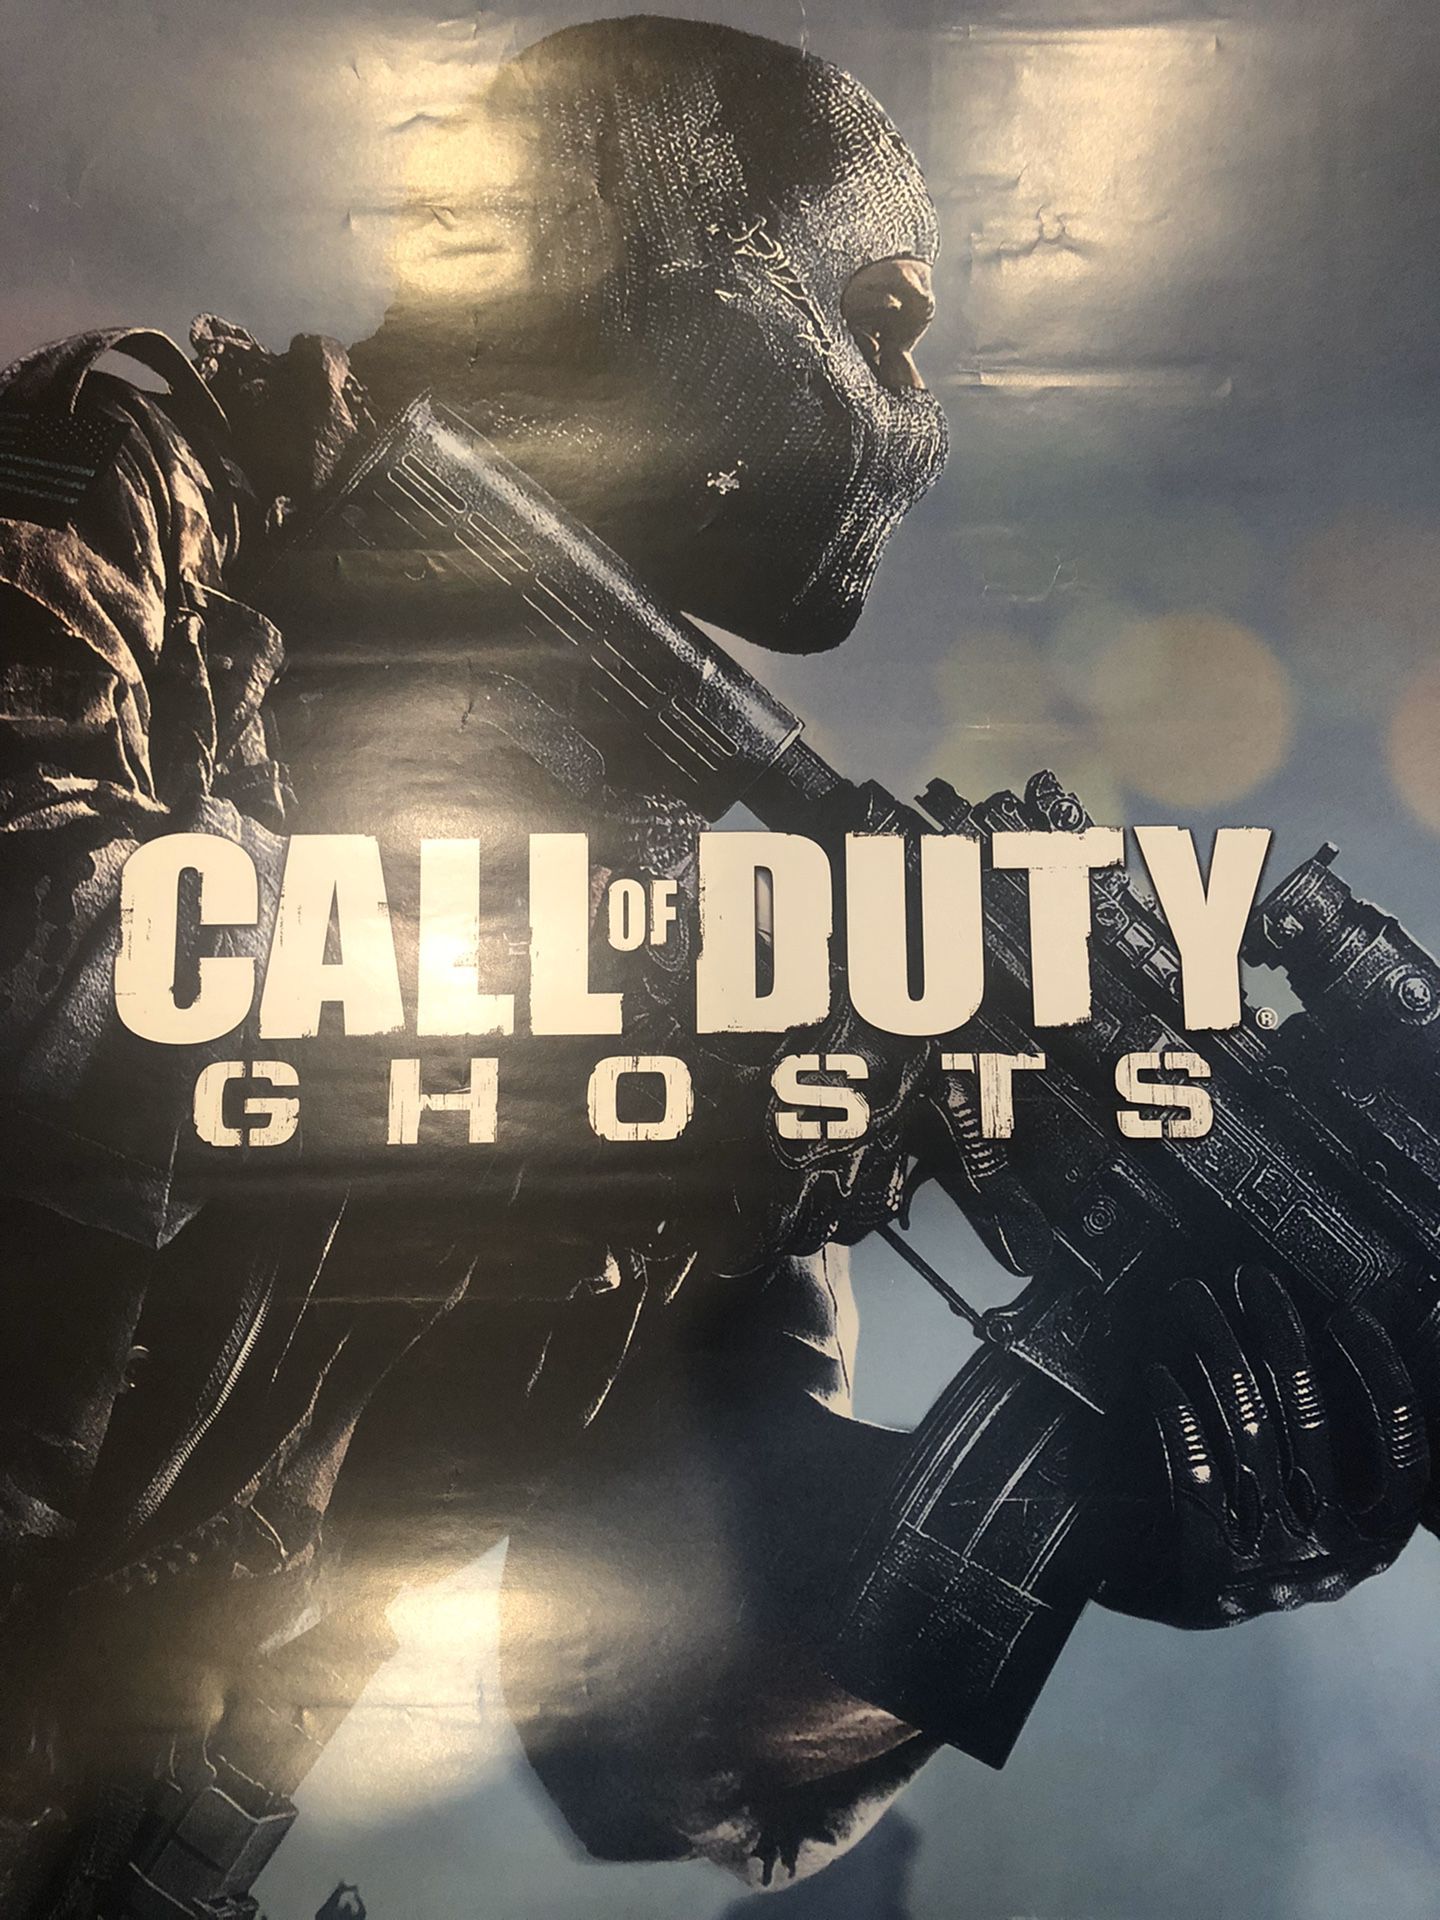 Call of duty ghosts poster for Sale in Berkeley Township, NJ - OfferUp